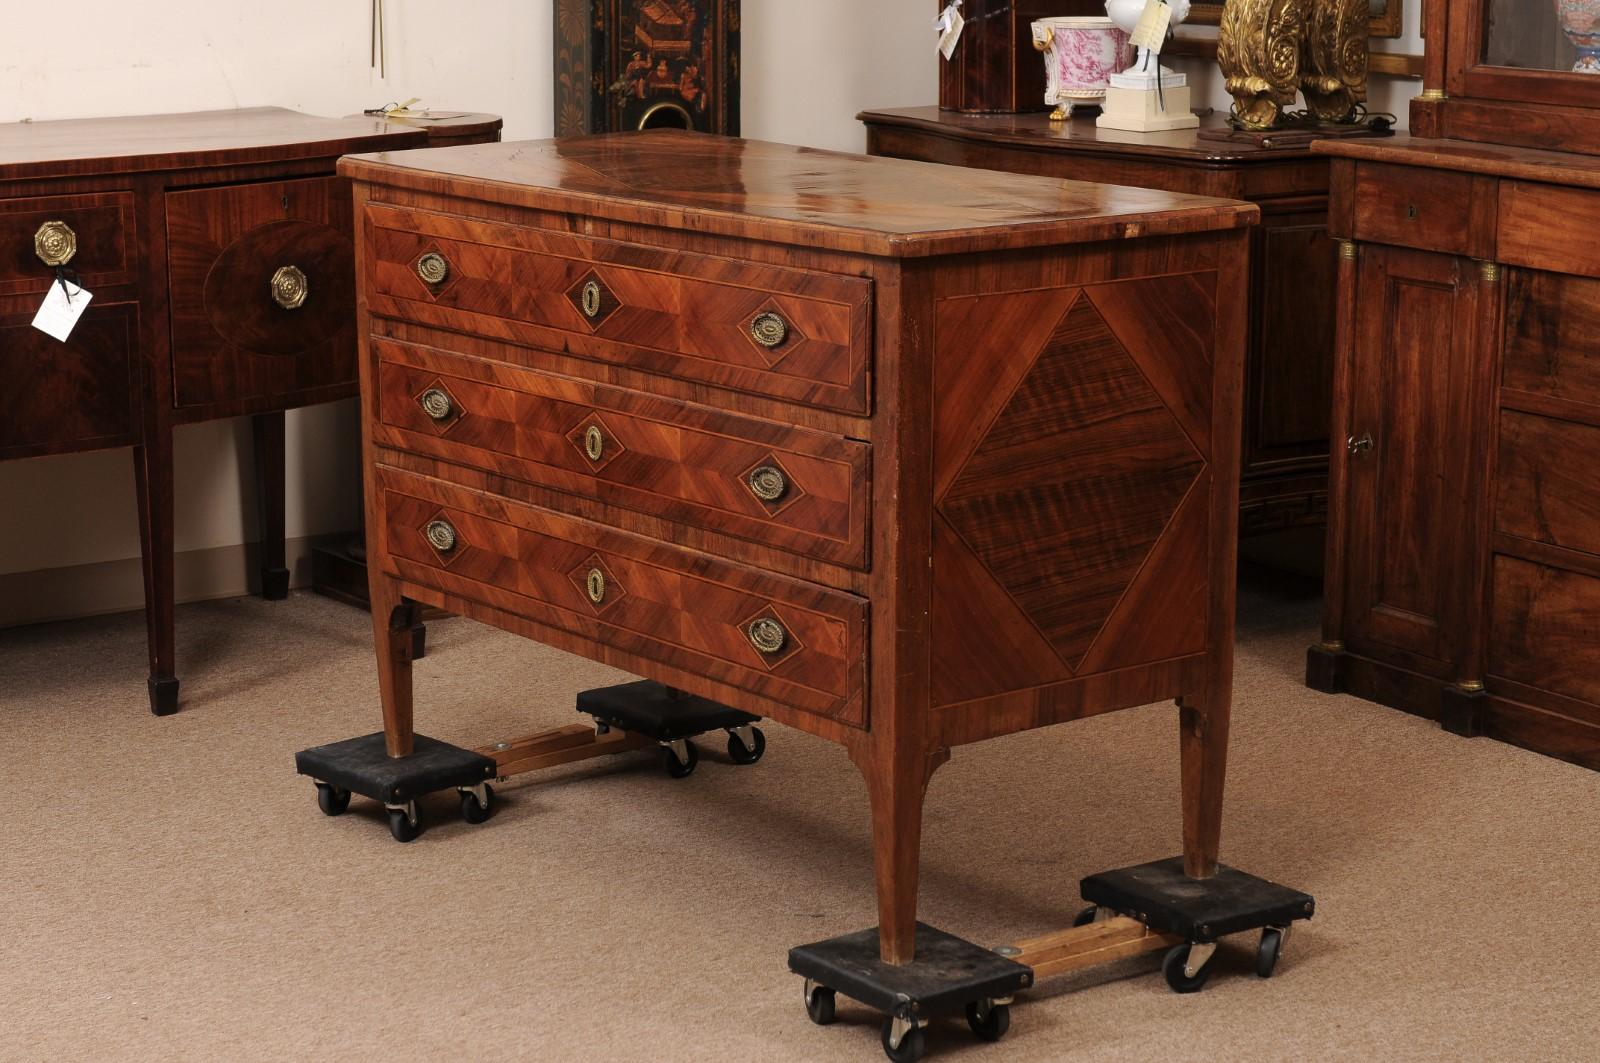 Late 18th Century Italian Neoclassical Parquetry Inlaid Walnut Commode with 3 Dr For Sale 7